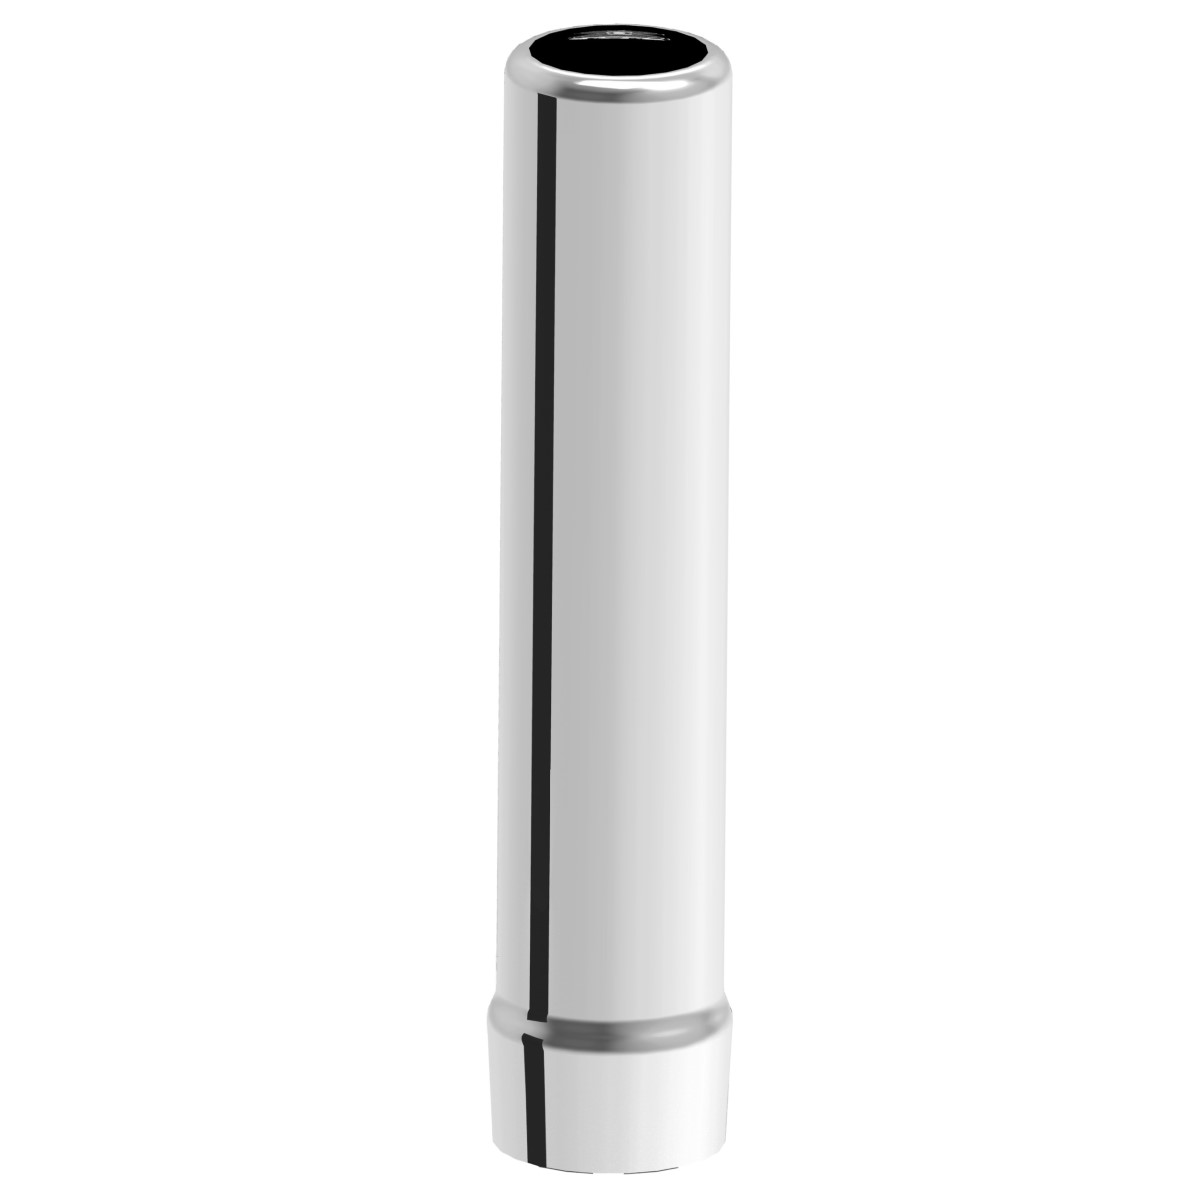 Stainless steel overflow pipe for 1”1/2 drain plate